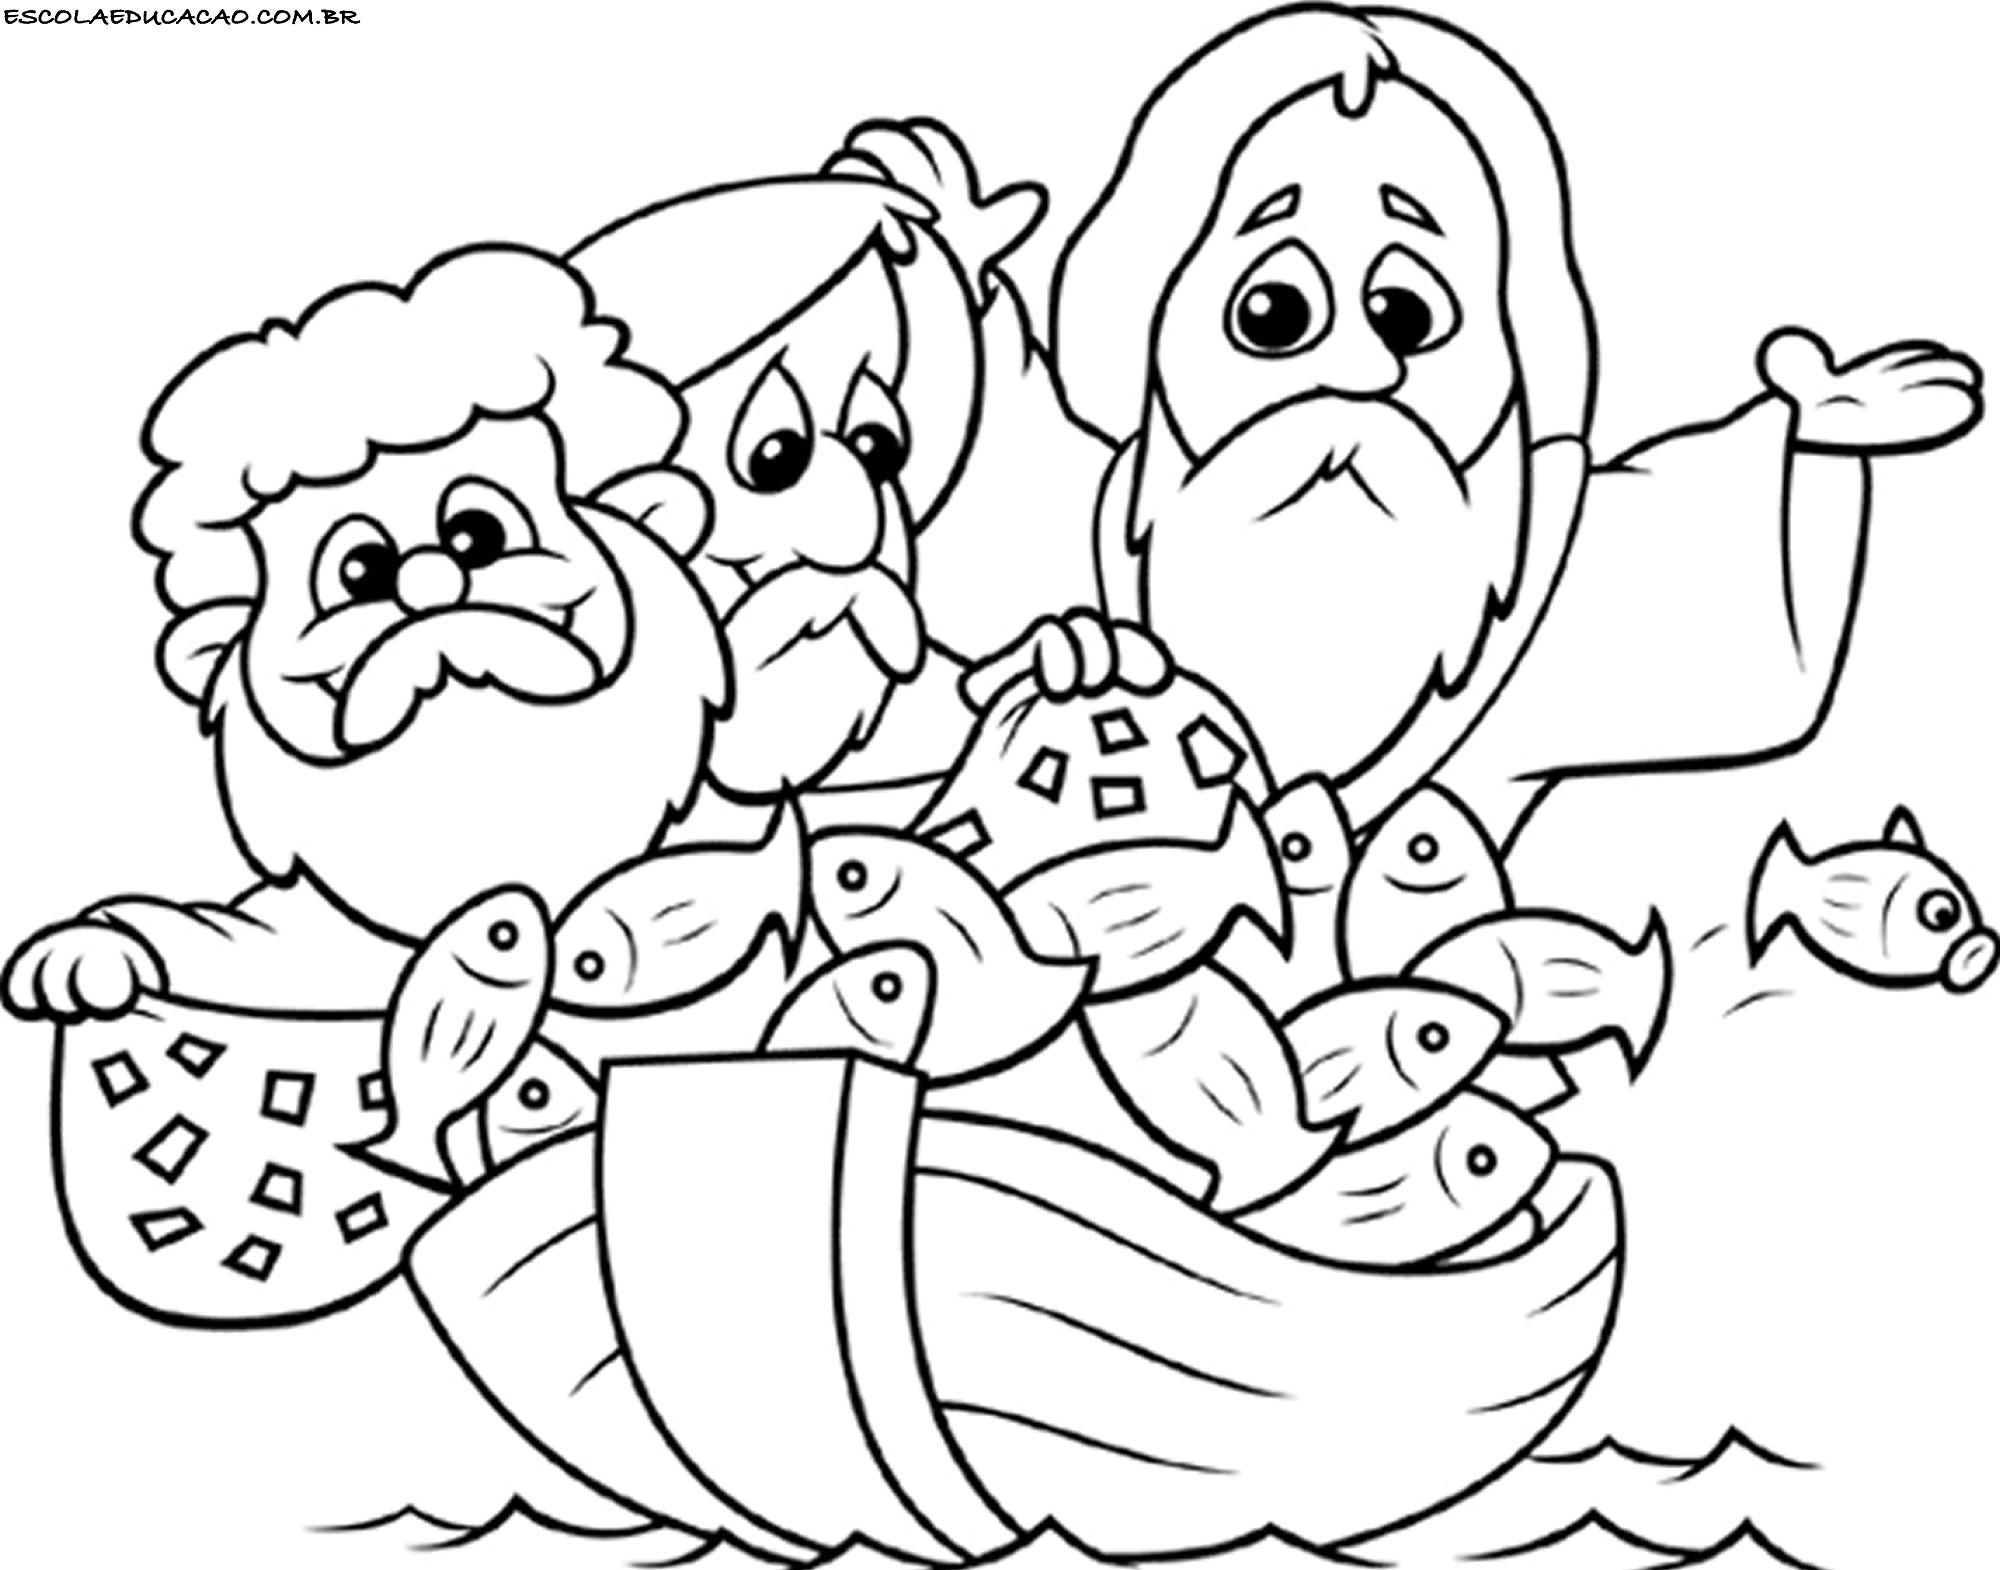 macarthur childrens bible stories coloring pages - photo #13